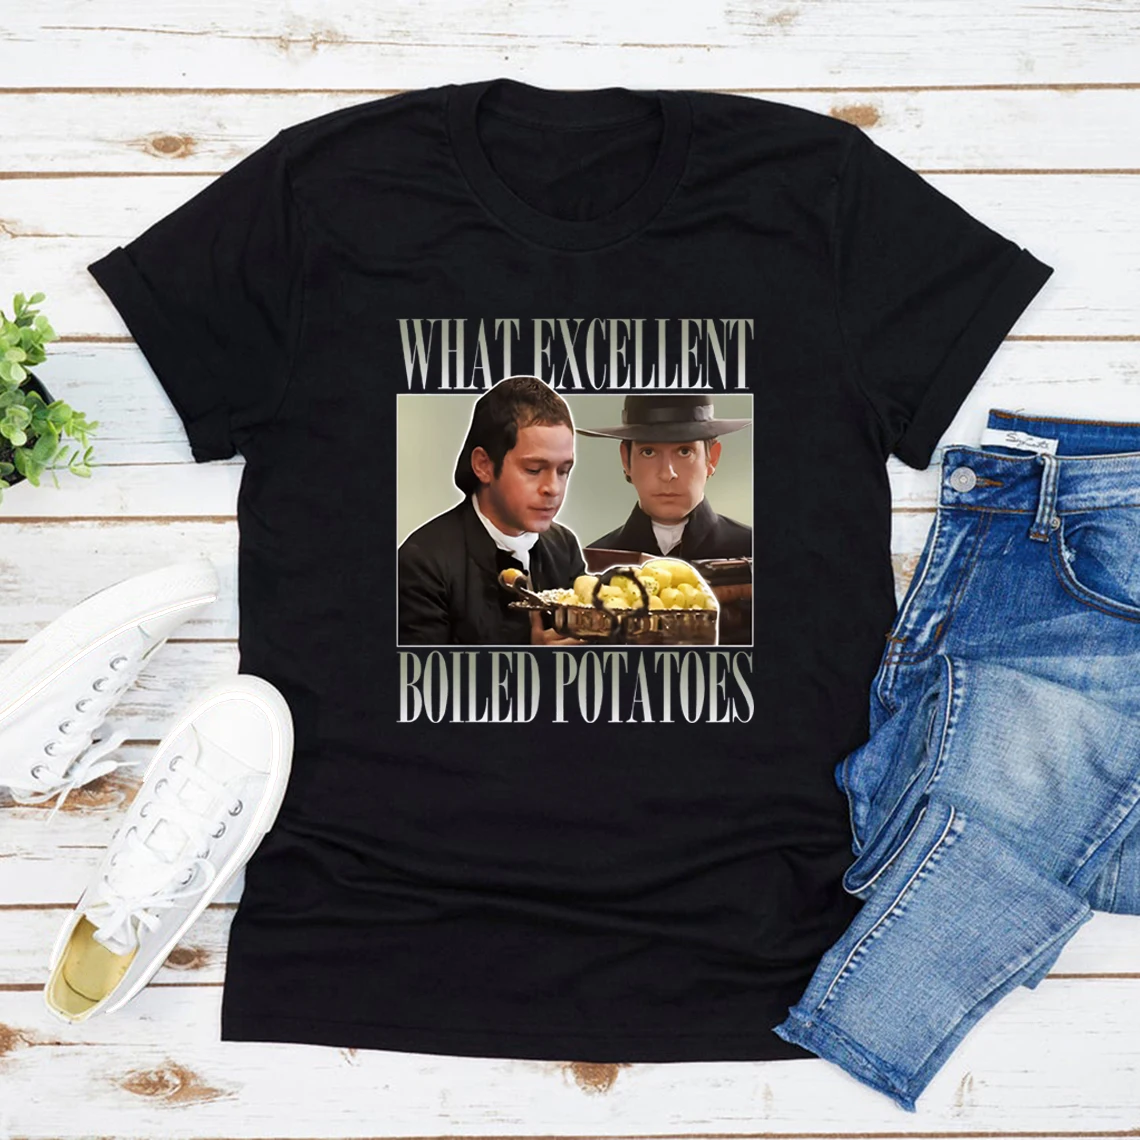 

Boiled Potatoes Funny Meme T-Shirt Pride and Prejudice Tee Women T Shirt Fitzwilliam Darcy Shirt Movie Graphic Tee Casual Tops